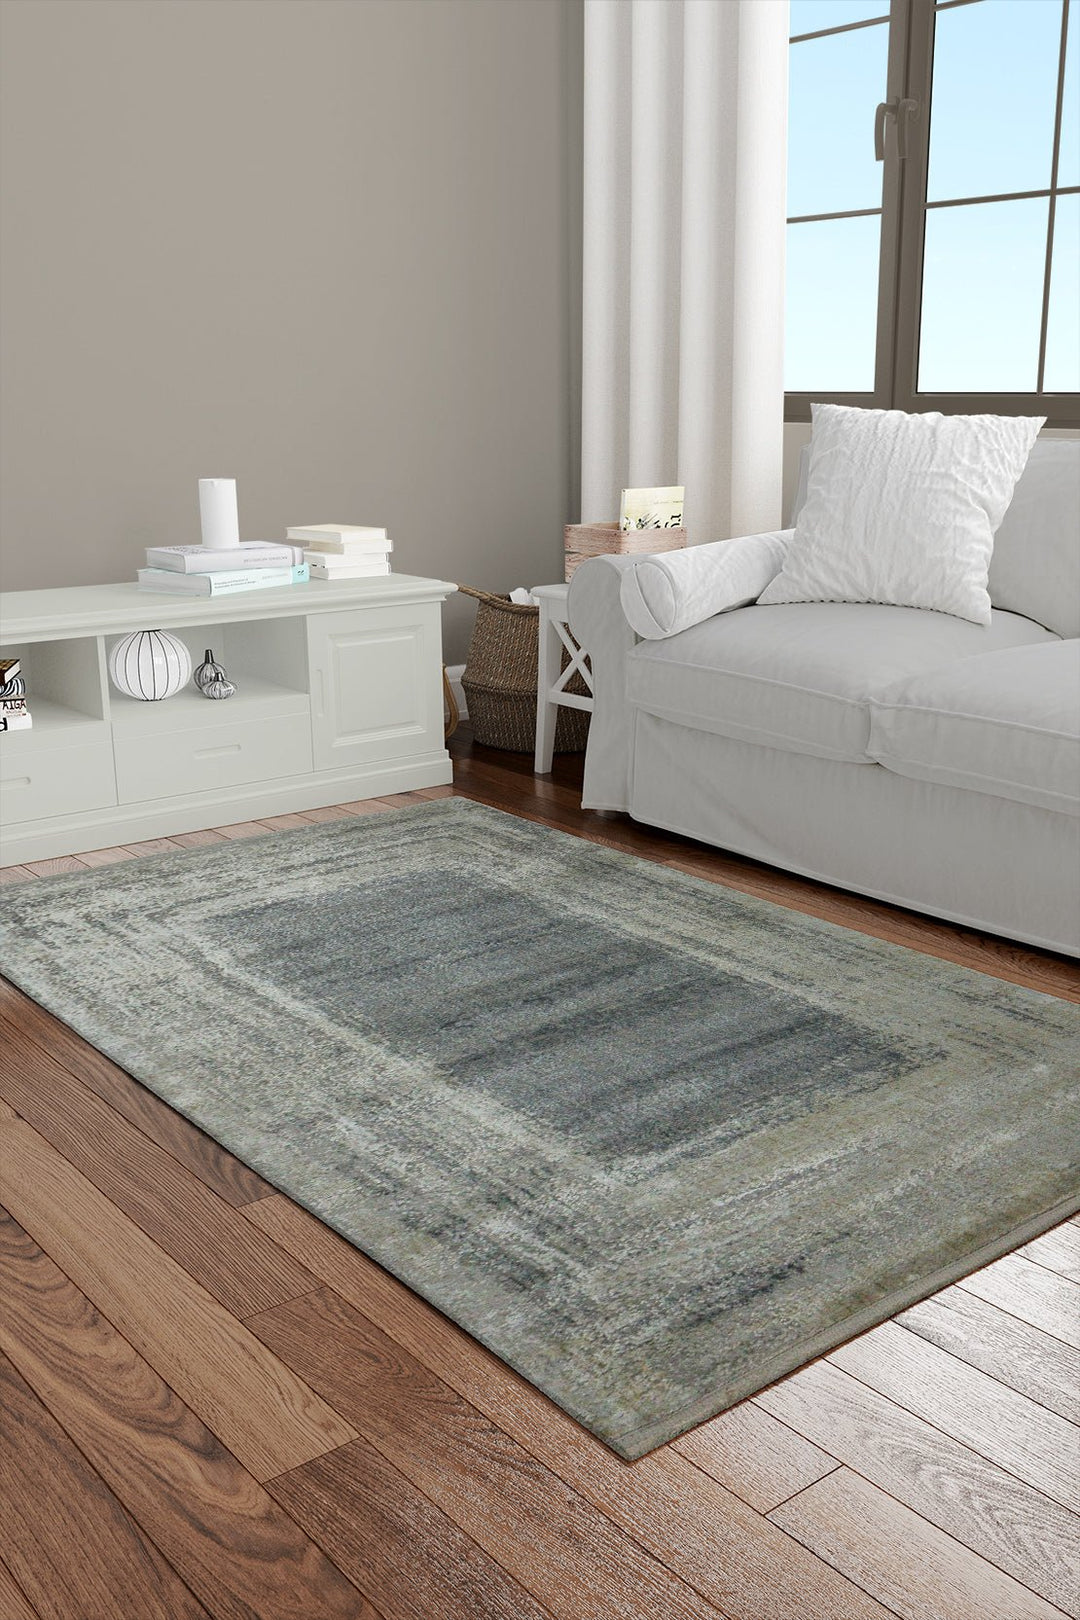 Turkish Modern Festival Viscos Rug - 2.6 x 3.9 FT - Gray - Sleek and Minimalist for Chic Interiors - V Surfaces